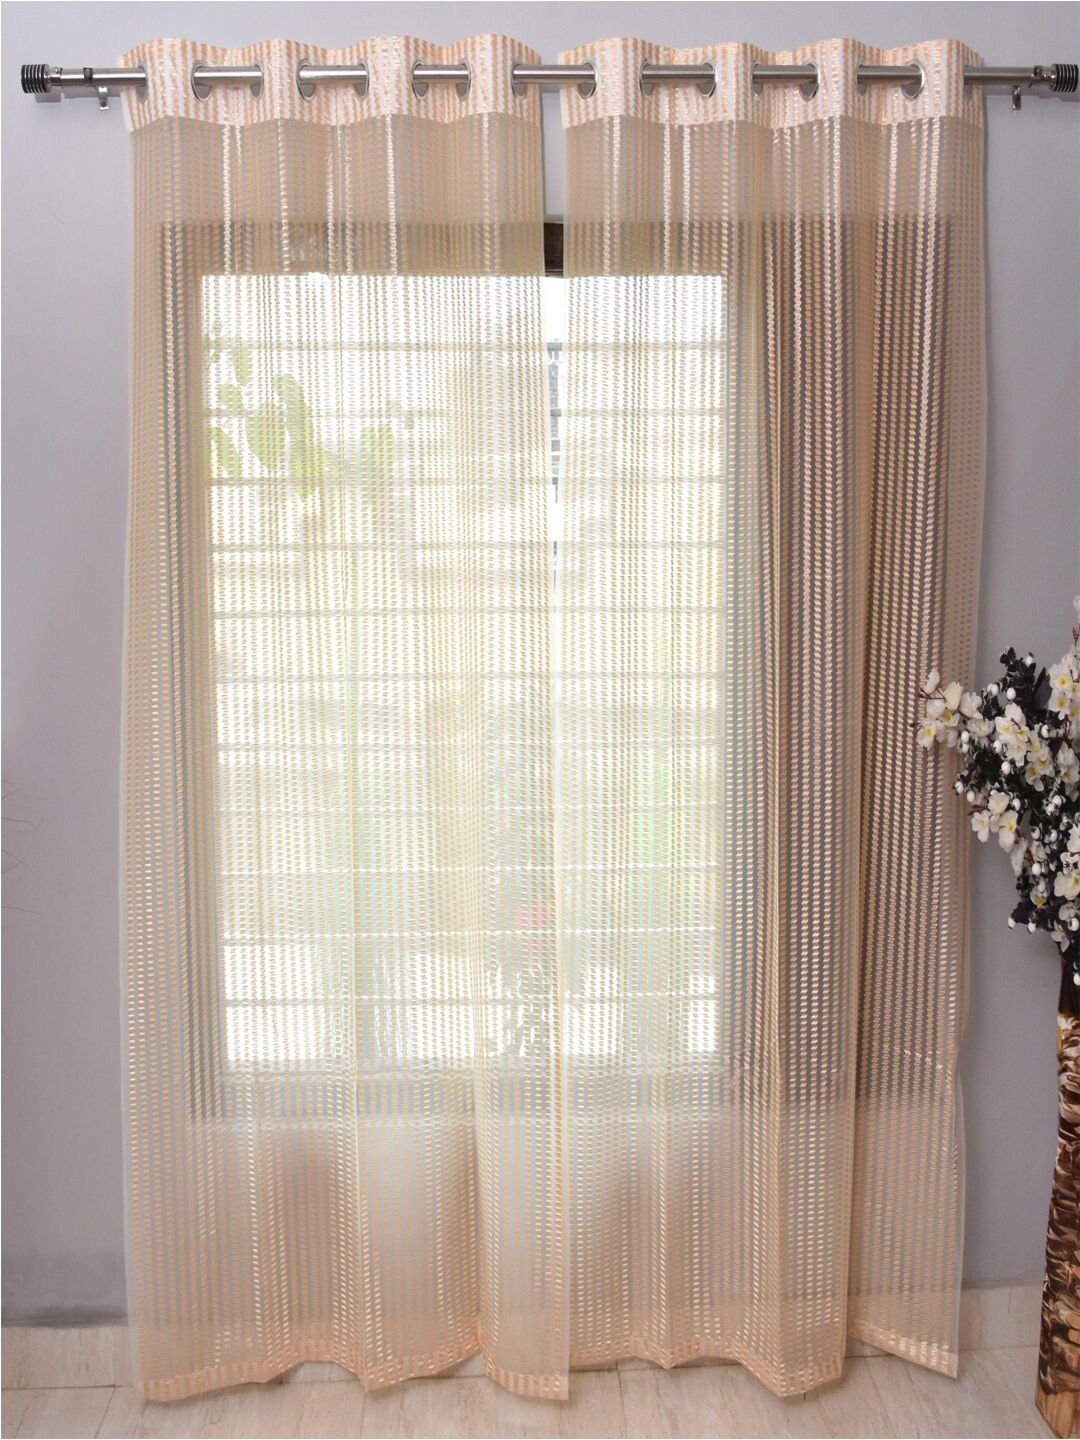 Homefab India Unisex Beige Curtains and Sheers Price in India